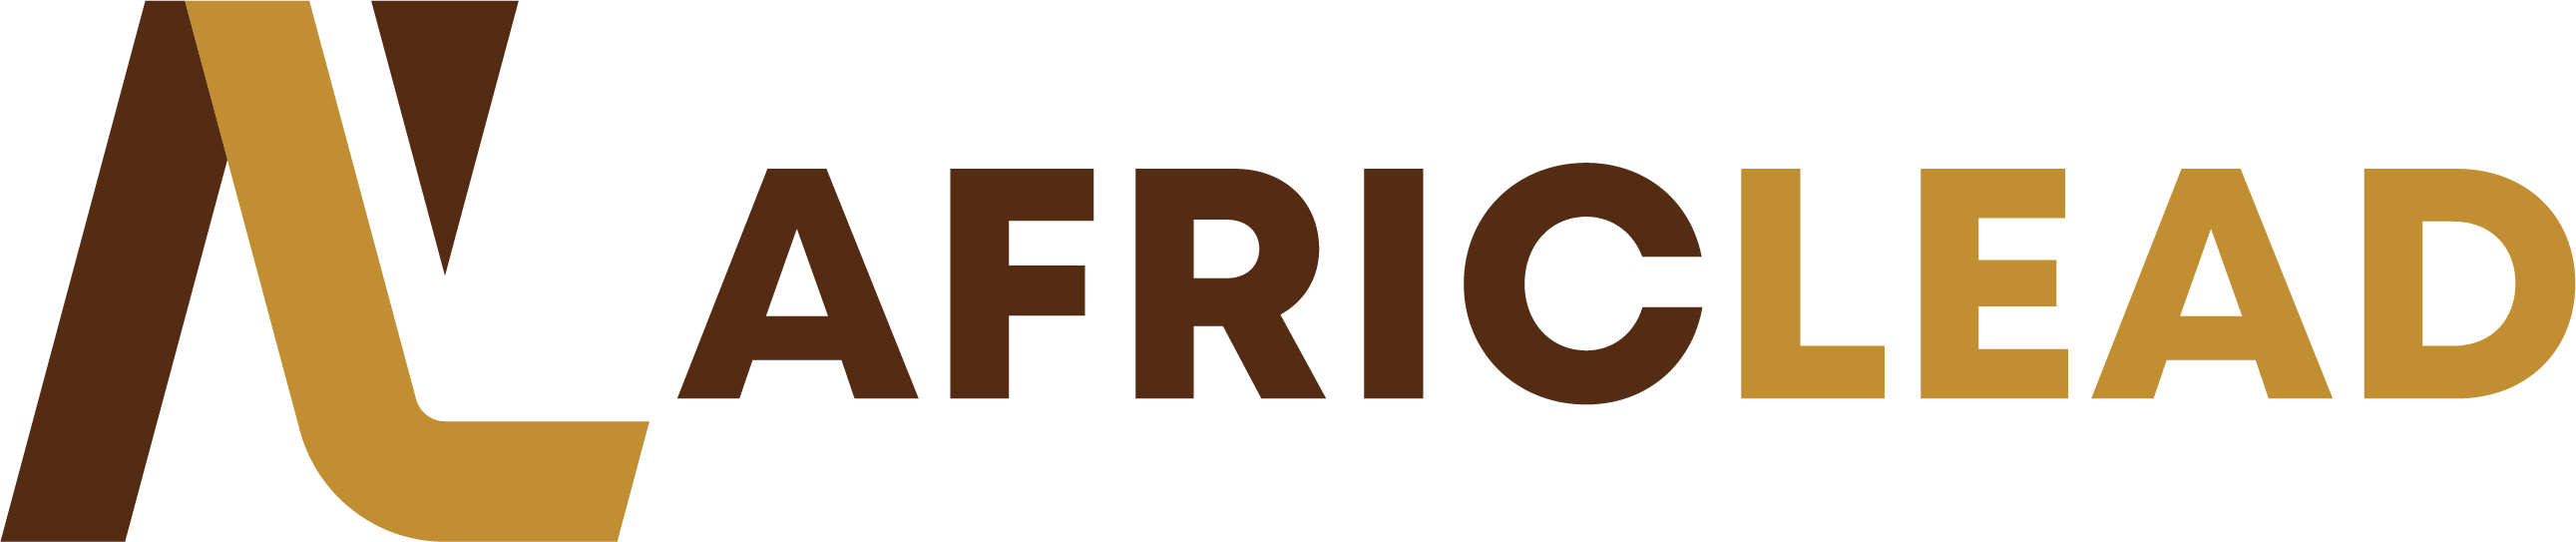 AfricLead